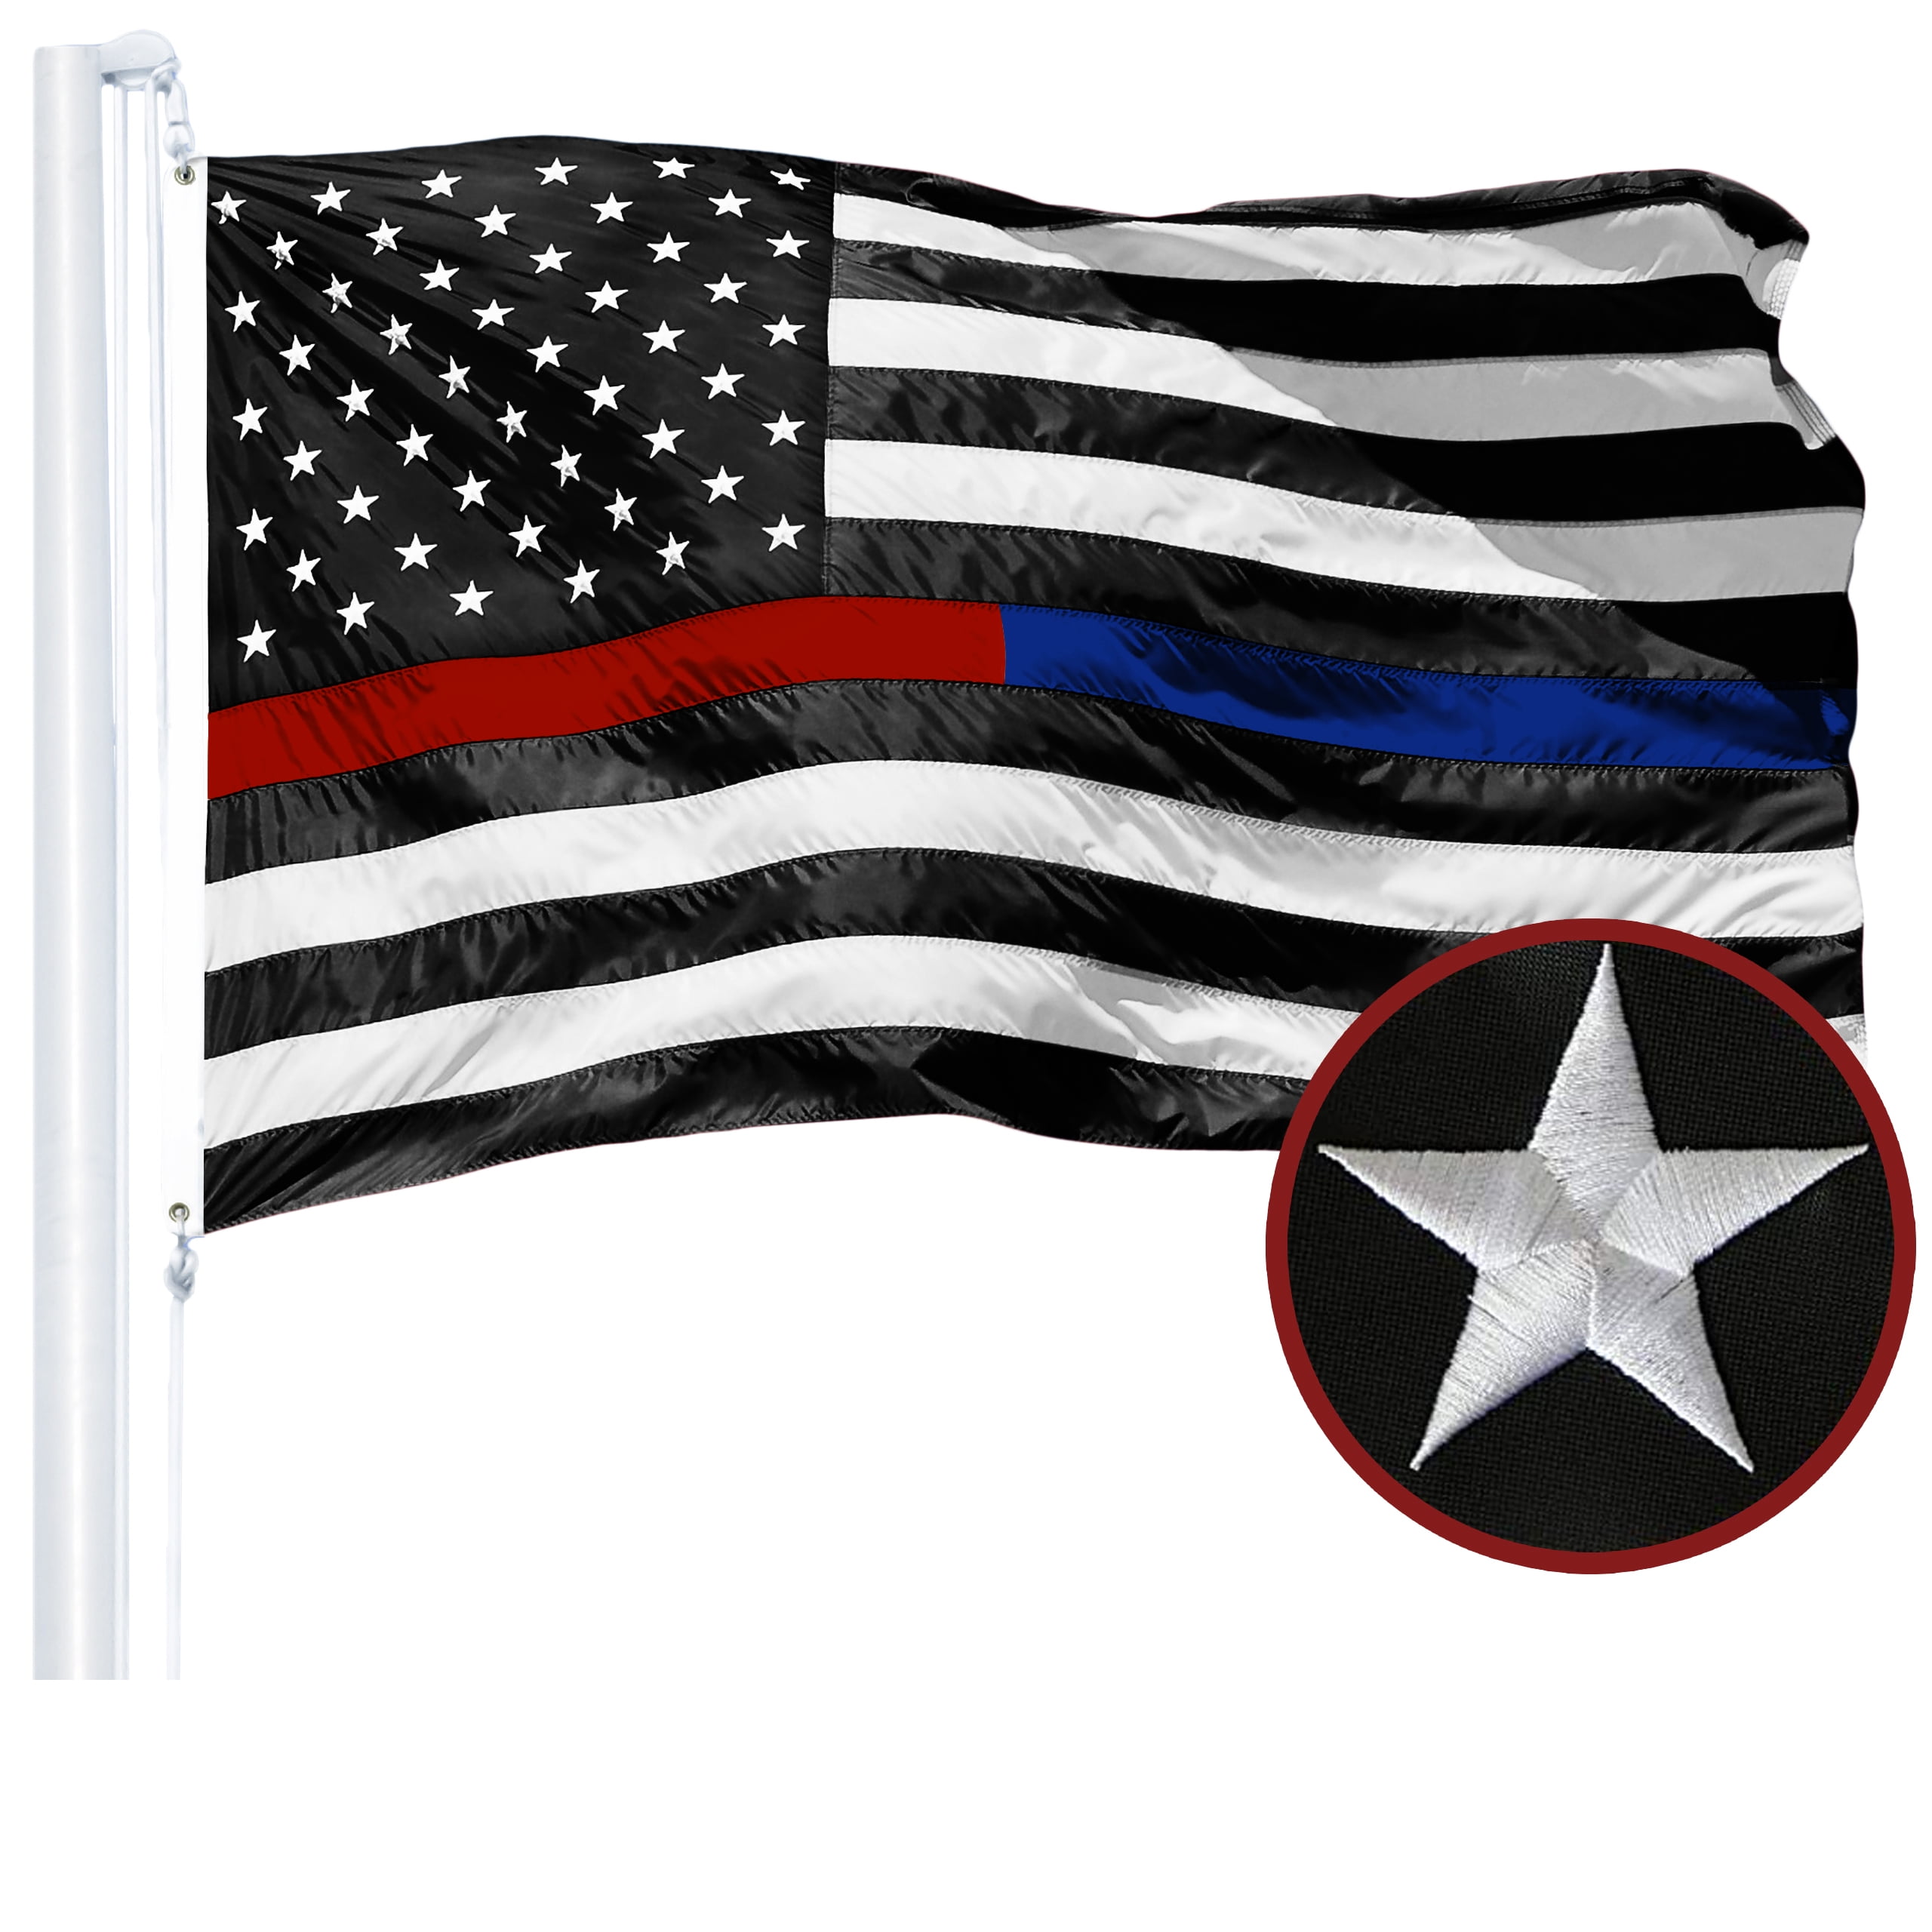 USA Flag 3x5 Ft American Outdoor Durable National Stars and Stripes Indoor Thin Blue Line American Flag 3x5 Blue Stripe American Matter Police Flags US Flags God Bless America 